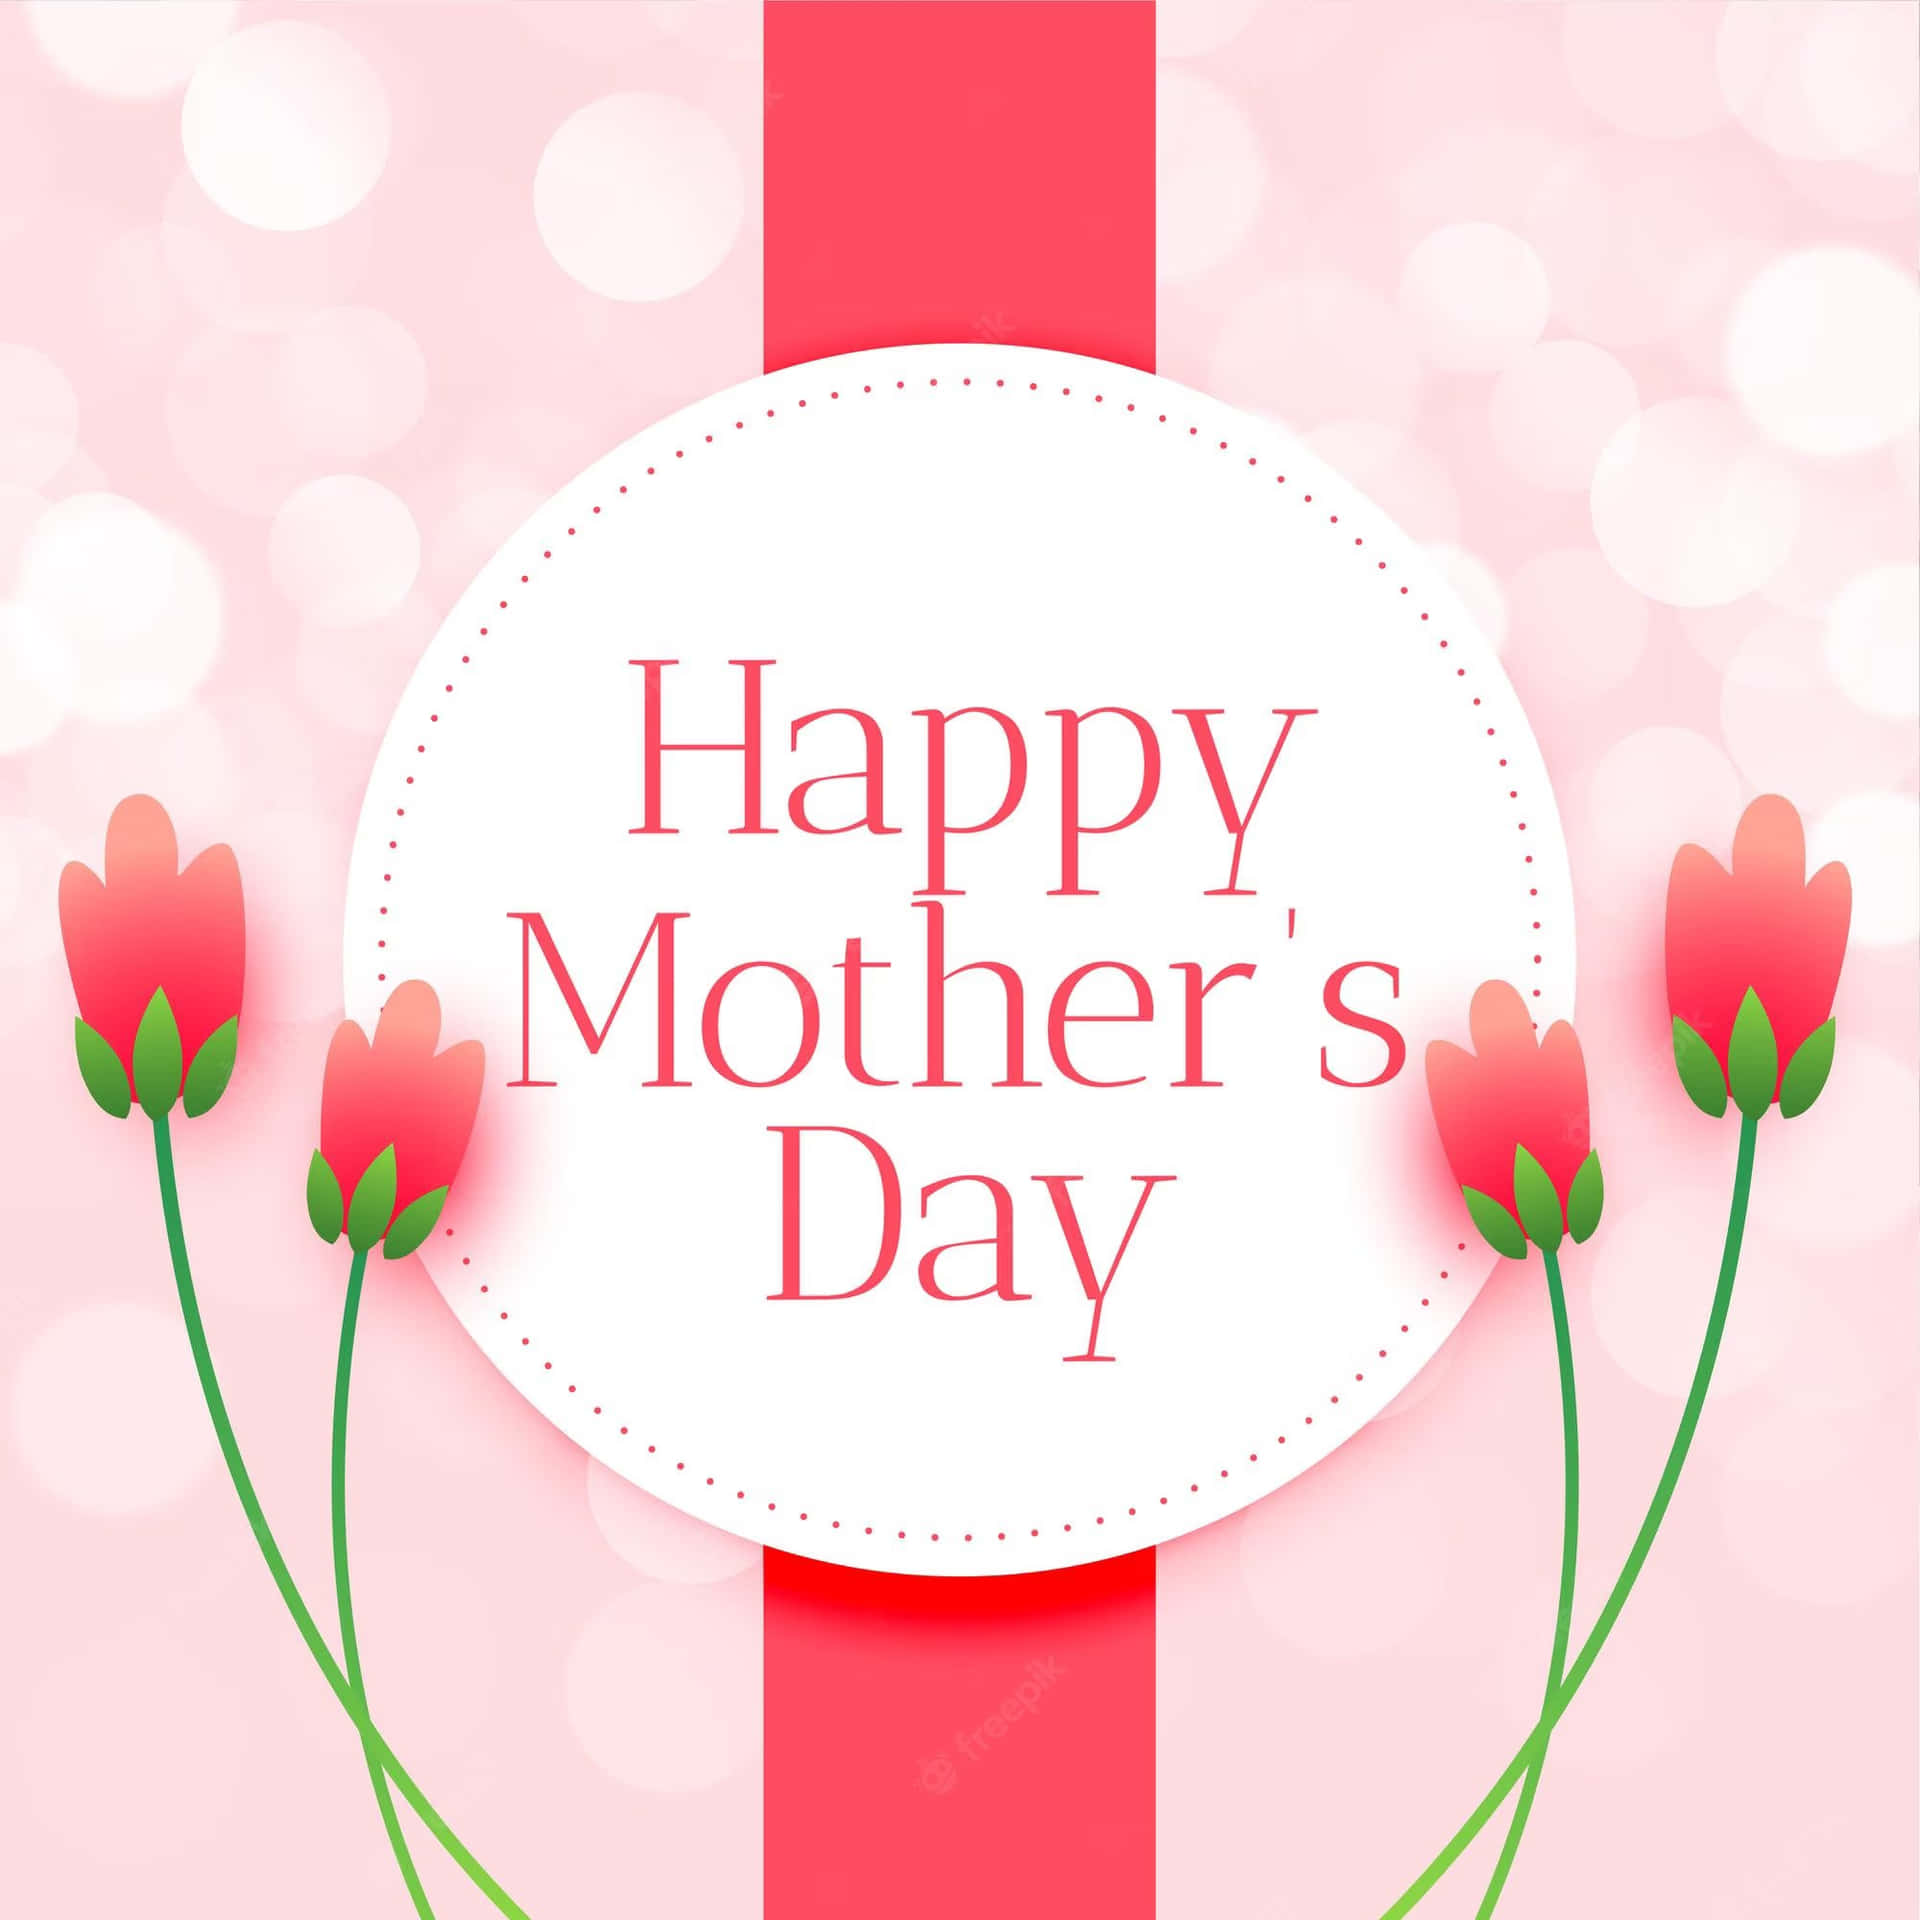 Wishing all Mothers a delightful Happy Mother’s Day!